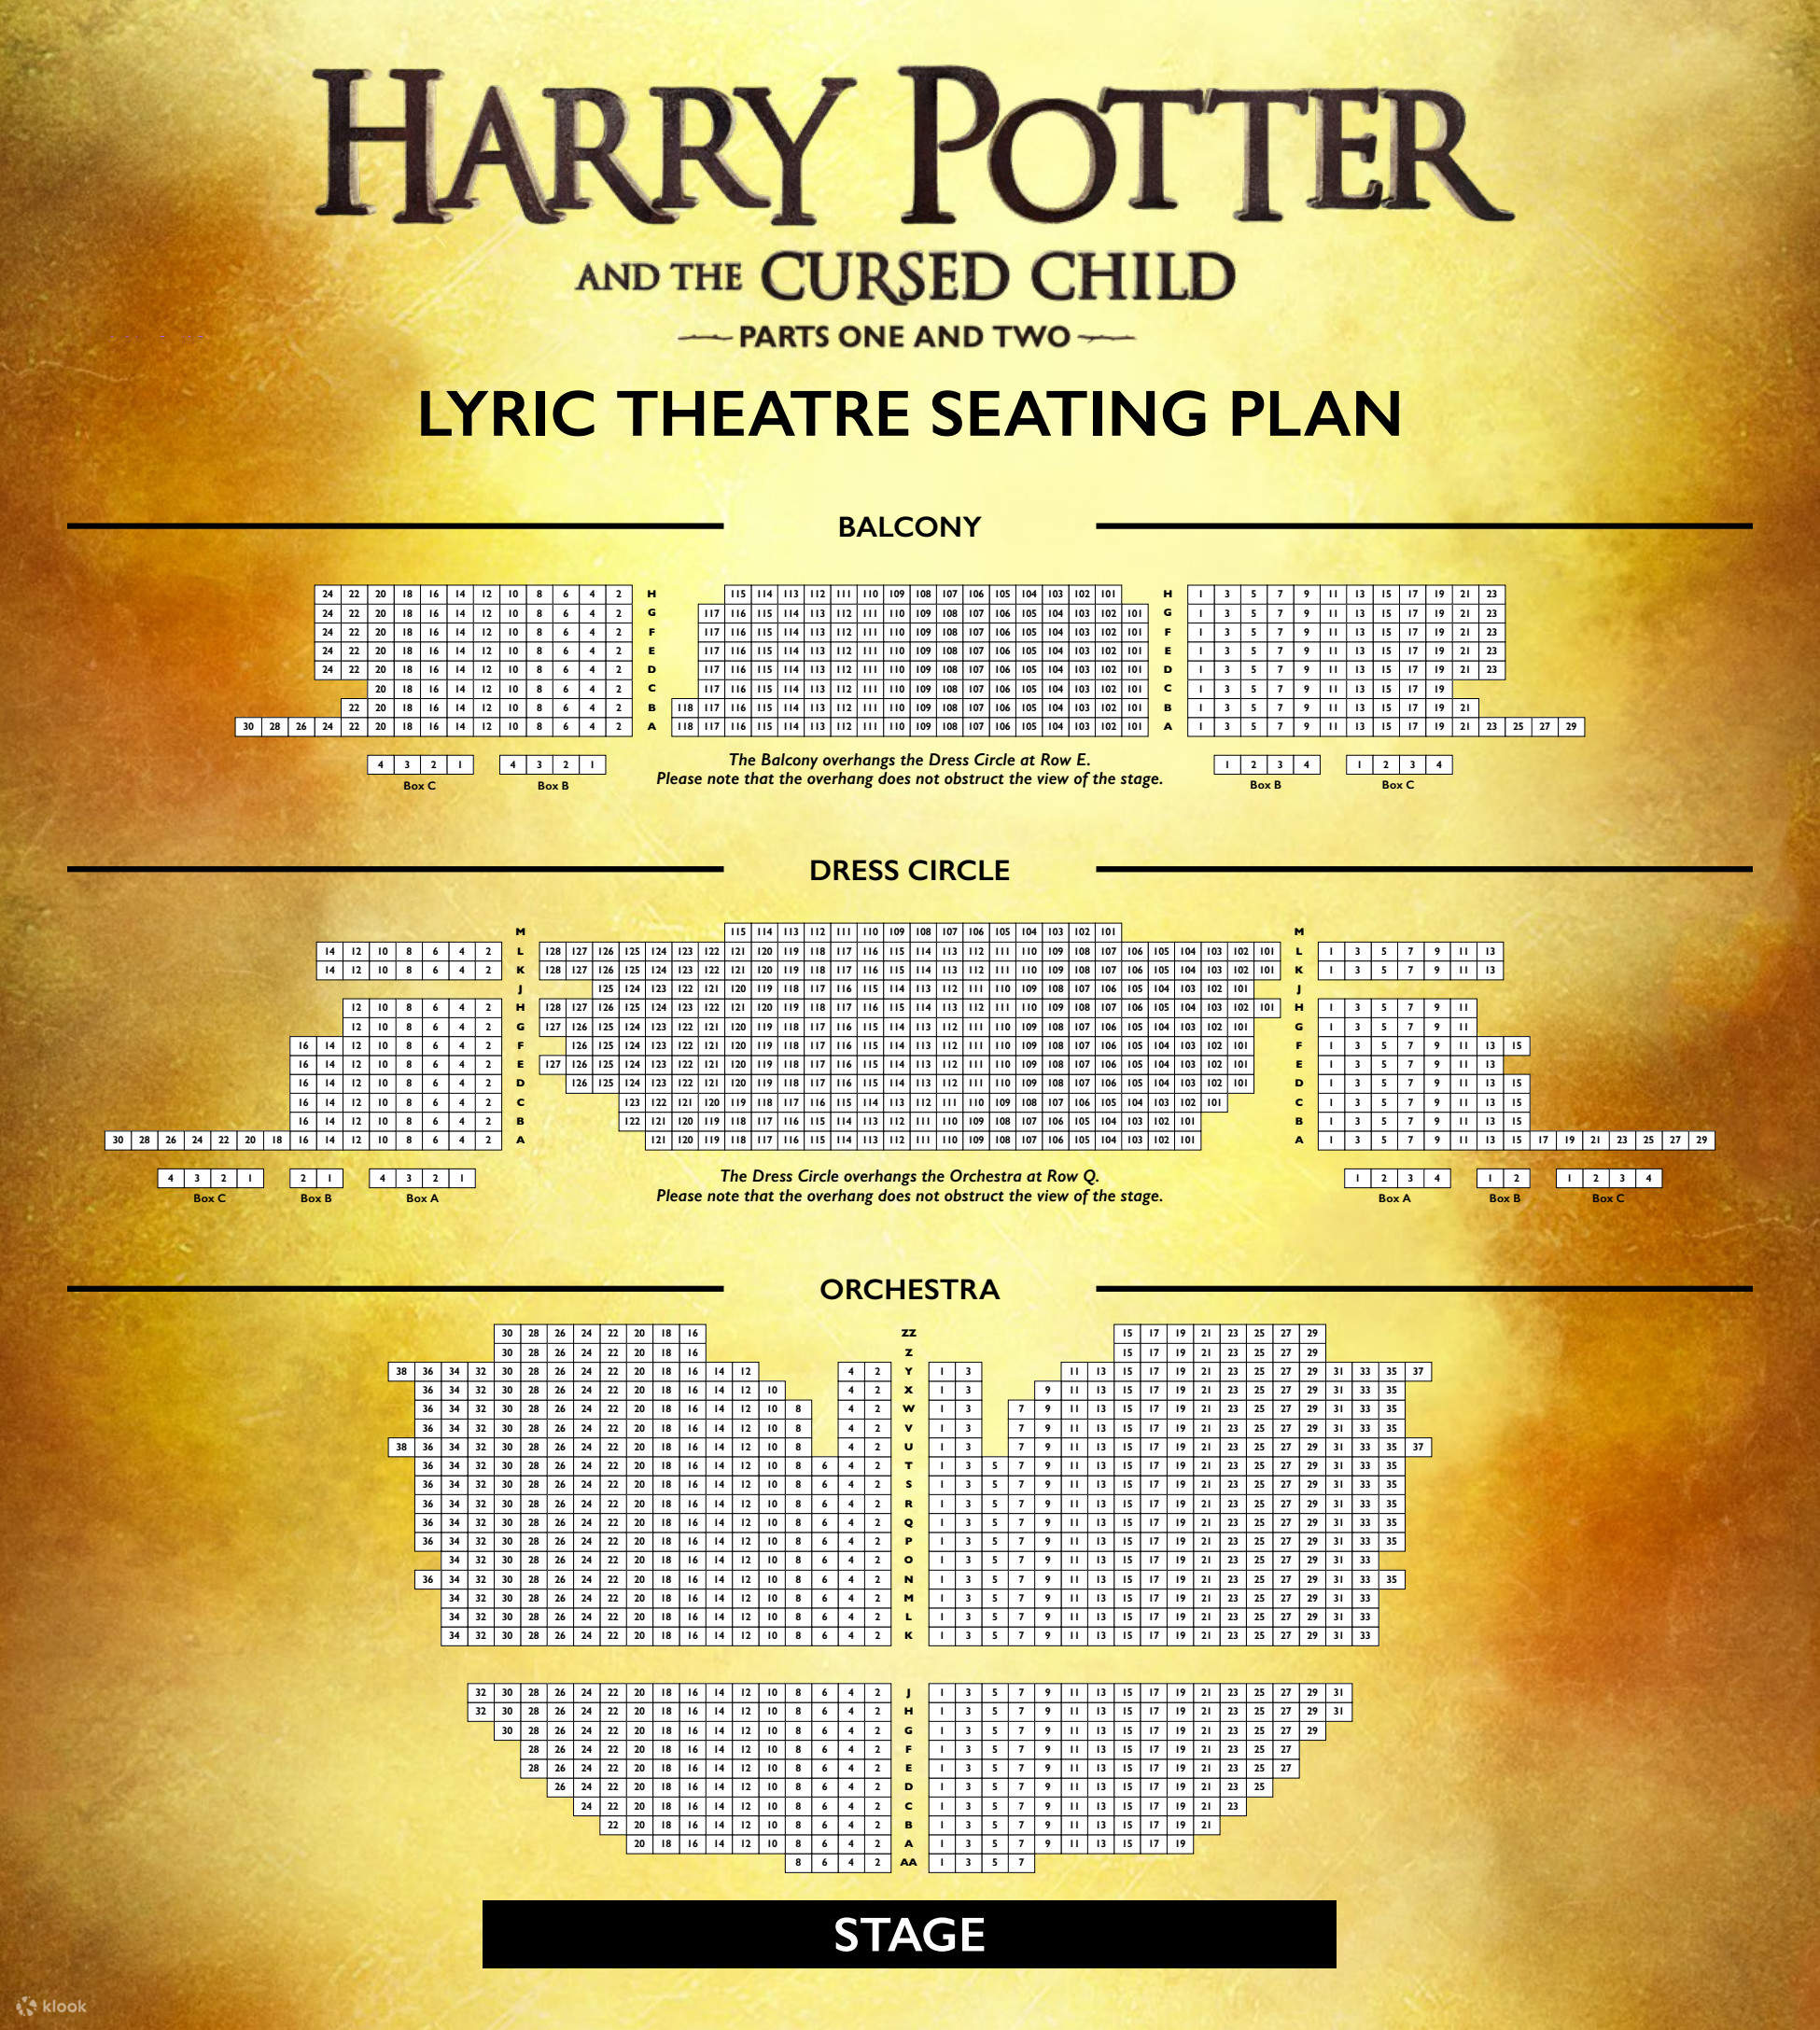 Theatre seating. Theatre Seating Plan. Theater Seats Plan. Seats in the Theatre. Theater poster.